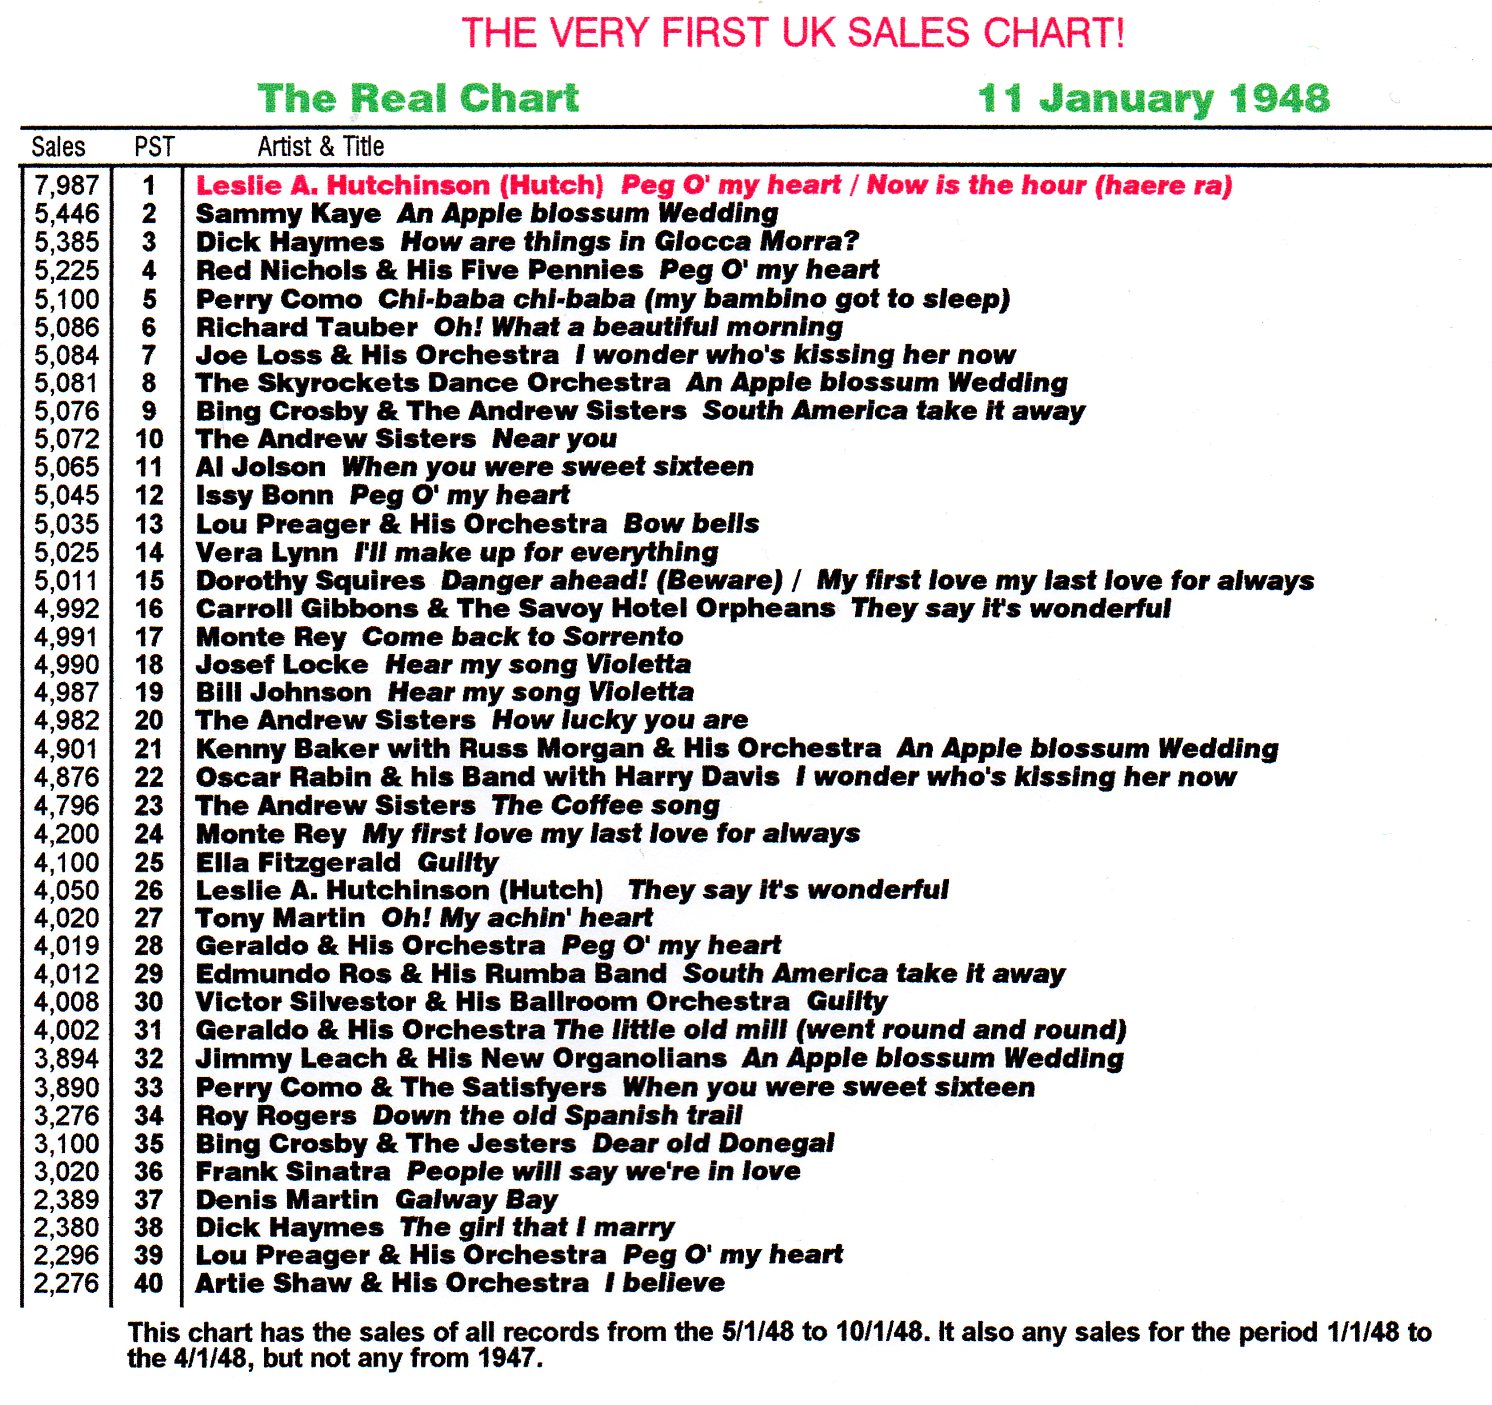 Real Life And Real Charts: The First Ever UK Chart